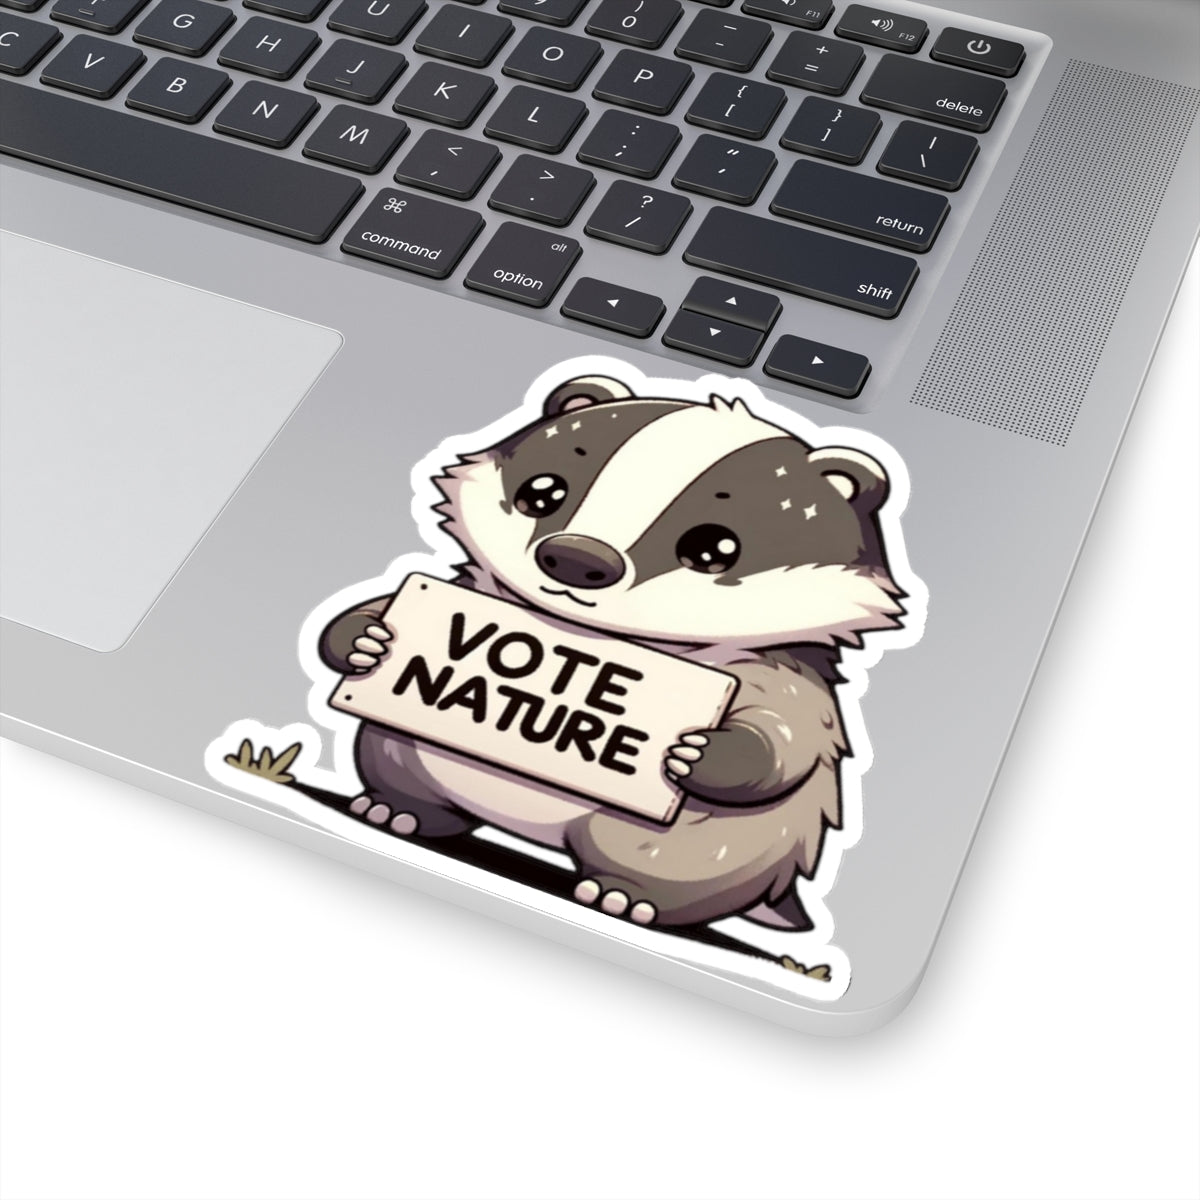 Inspirational Cute Badger Statement vinyl Sticker: Vote Nature! for laptop, kindle, phone, ipad, instrument case, notebook, mood board